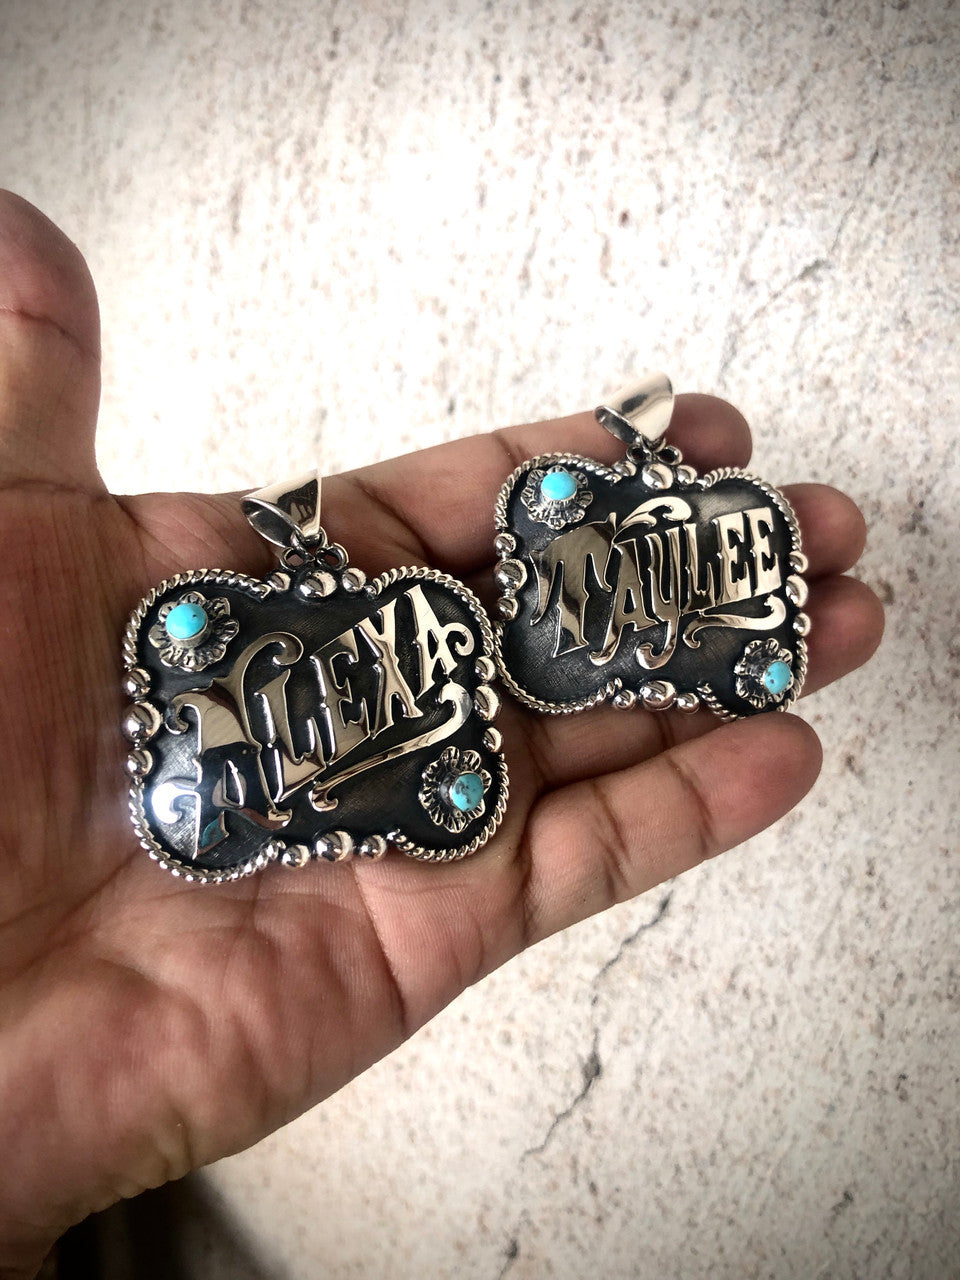 Limited Edition Navajo "Name Carved" Buckle Pendants Artist Michael Yazzie